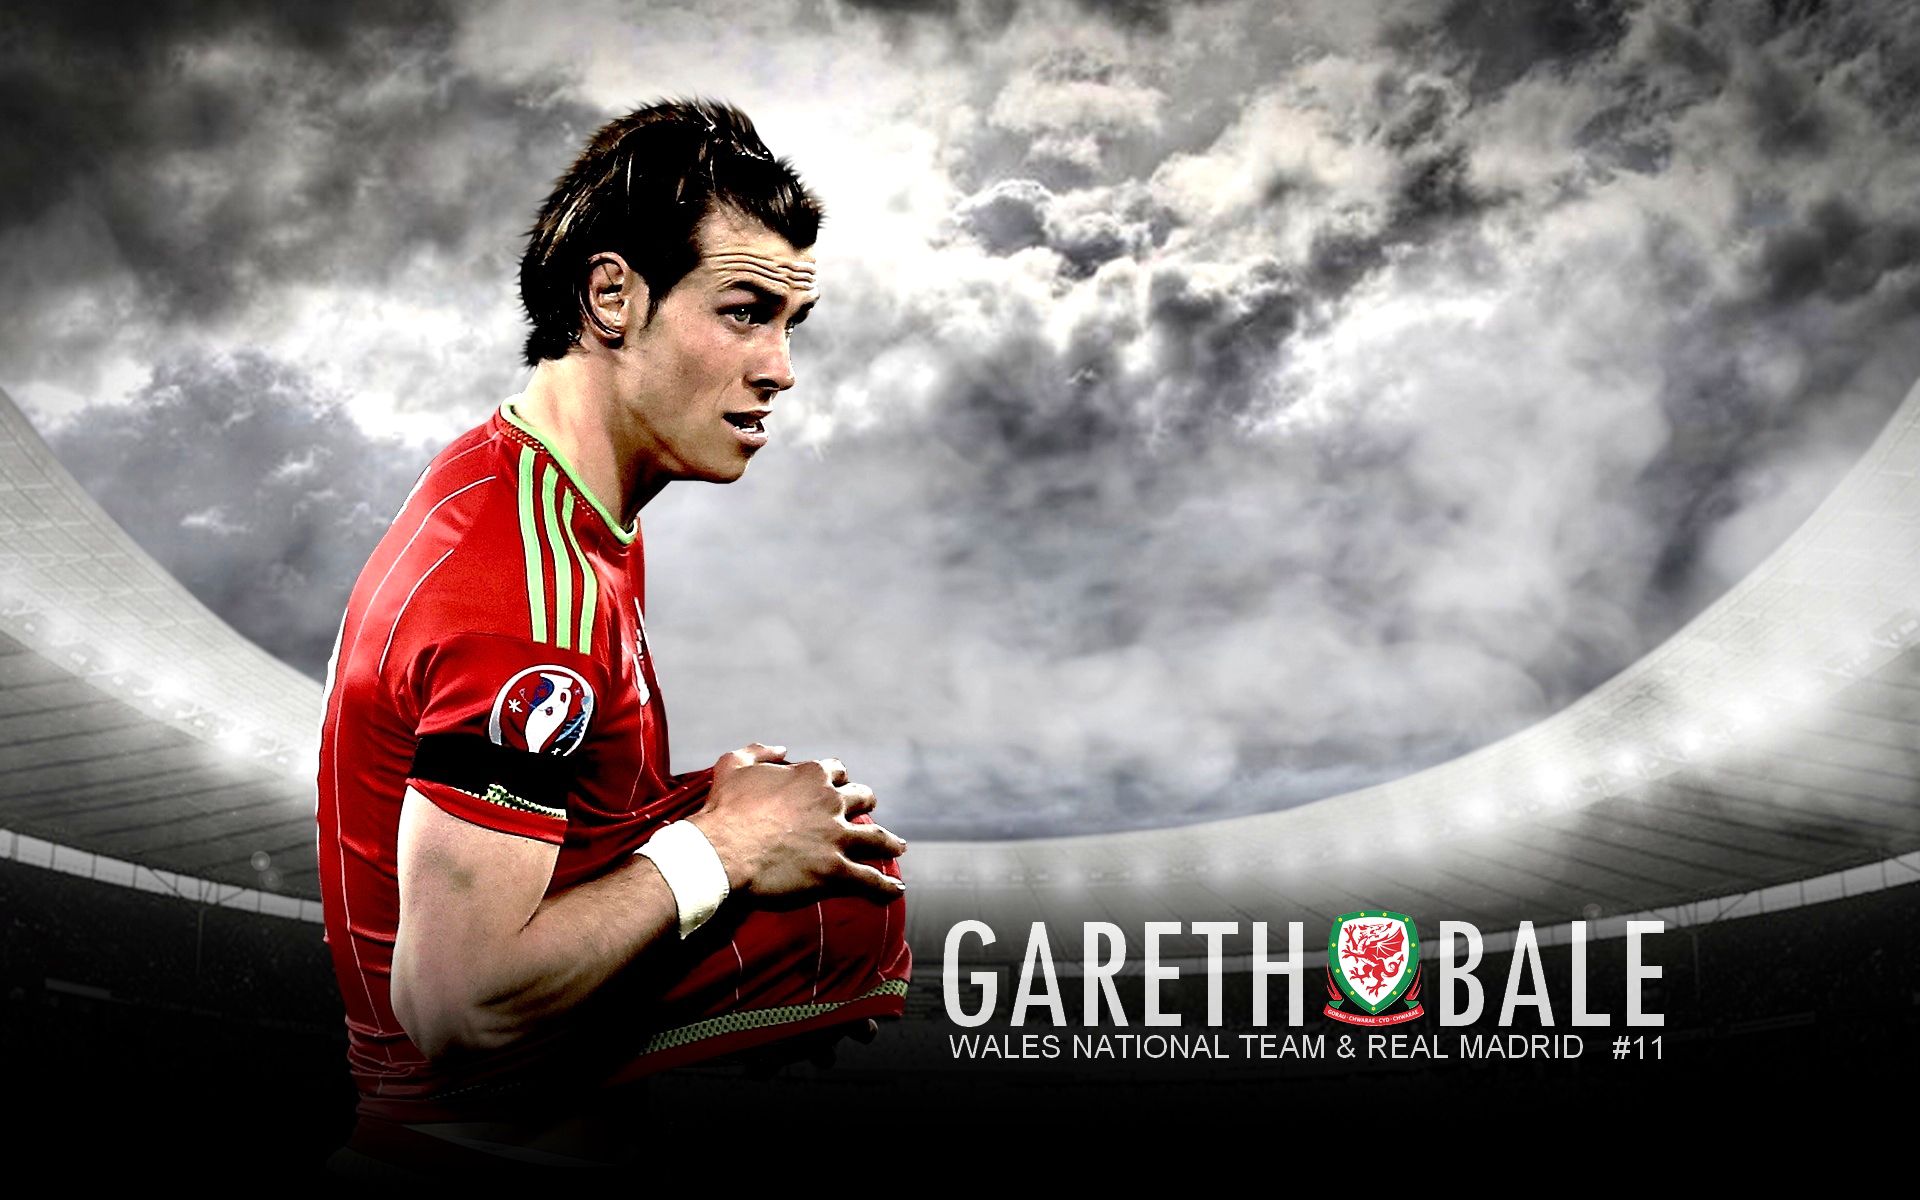 bale wallpaper,football player,soccer player,player,flash photography,team